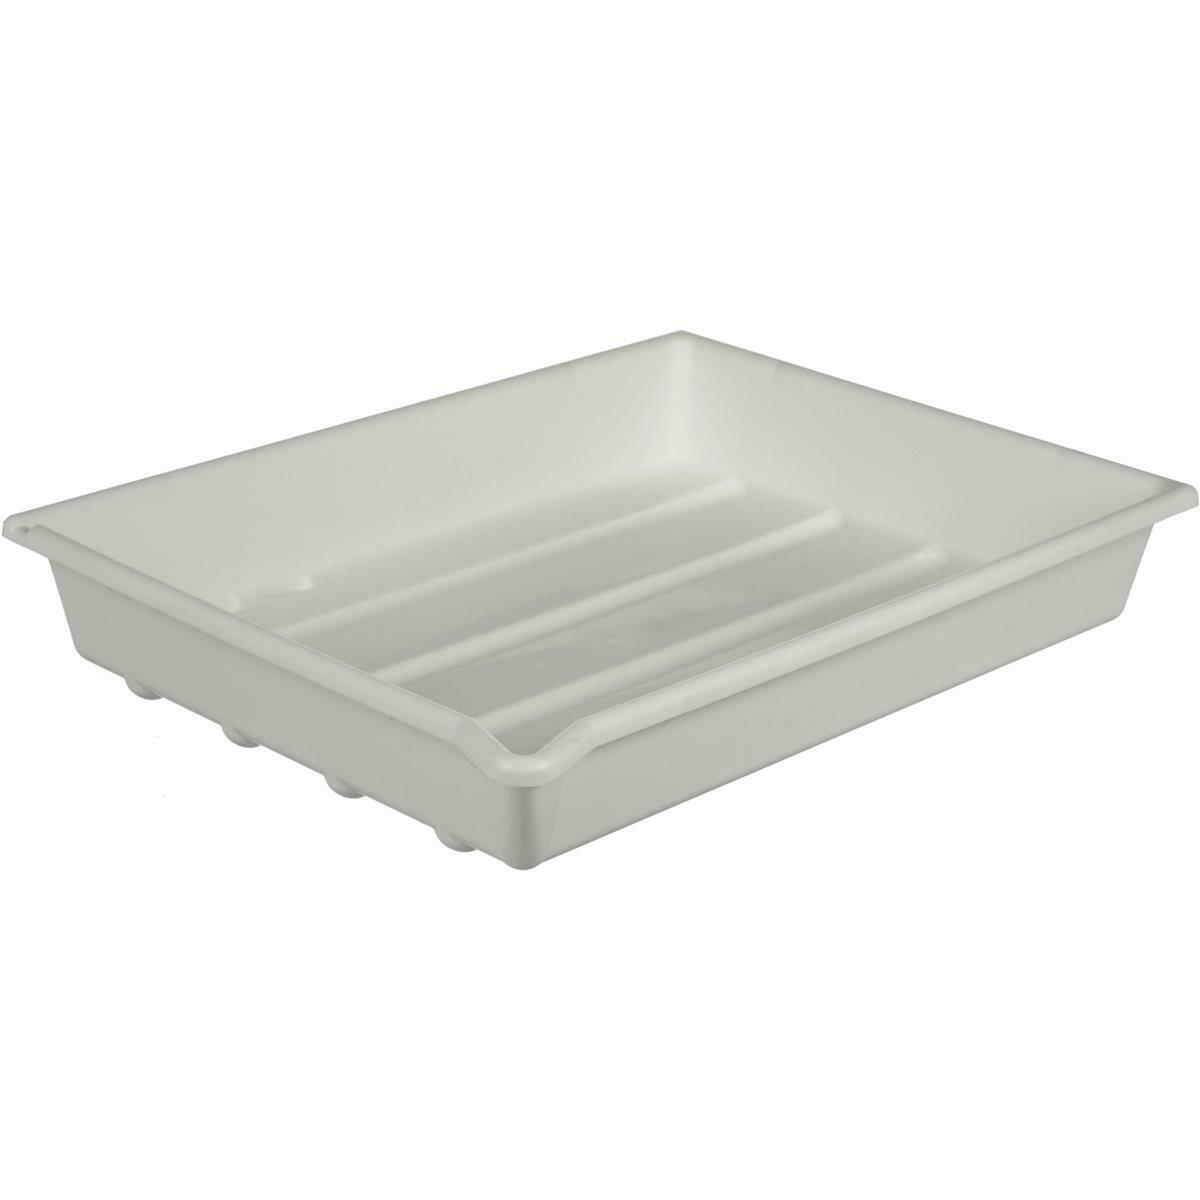 PATERSON DEVELOPING TRAY 8X10 WHT 324W